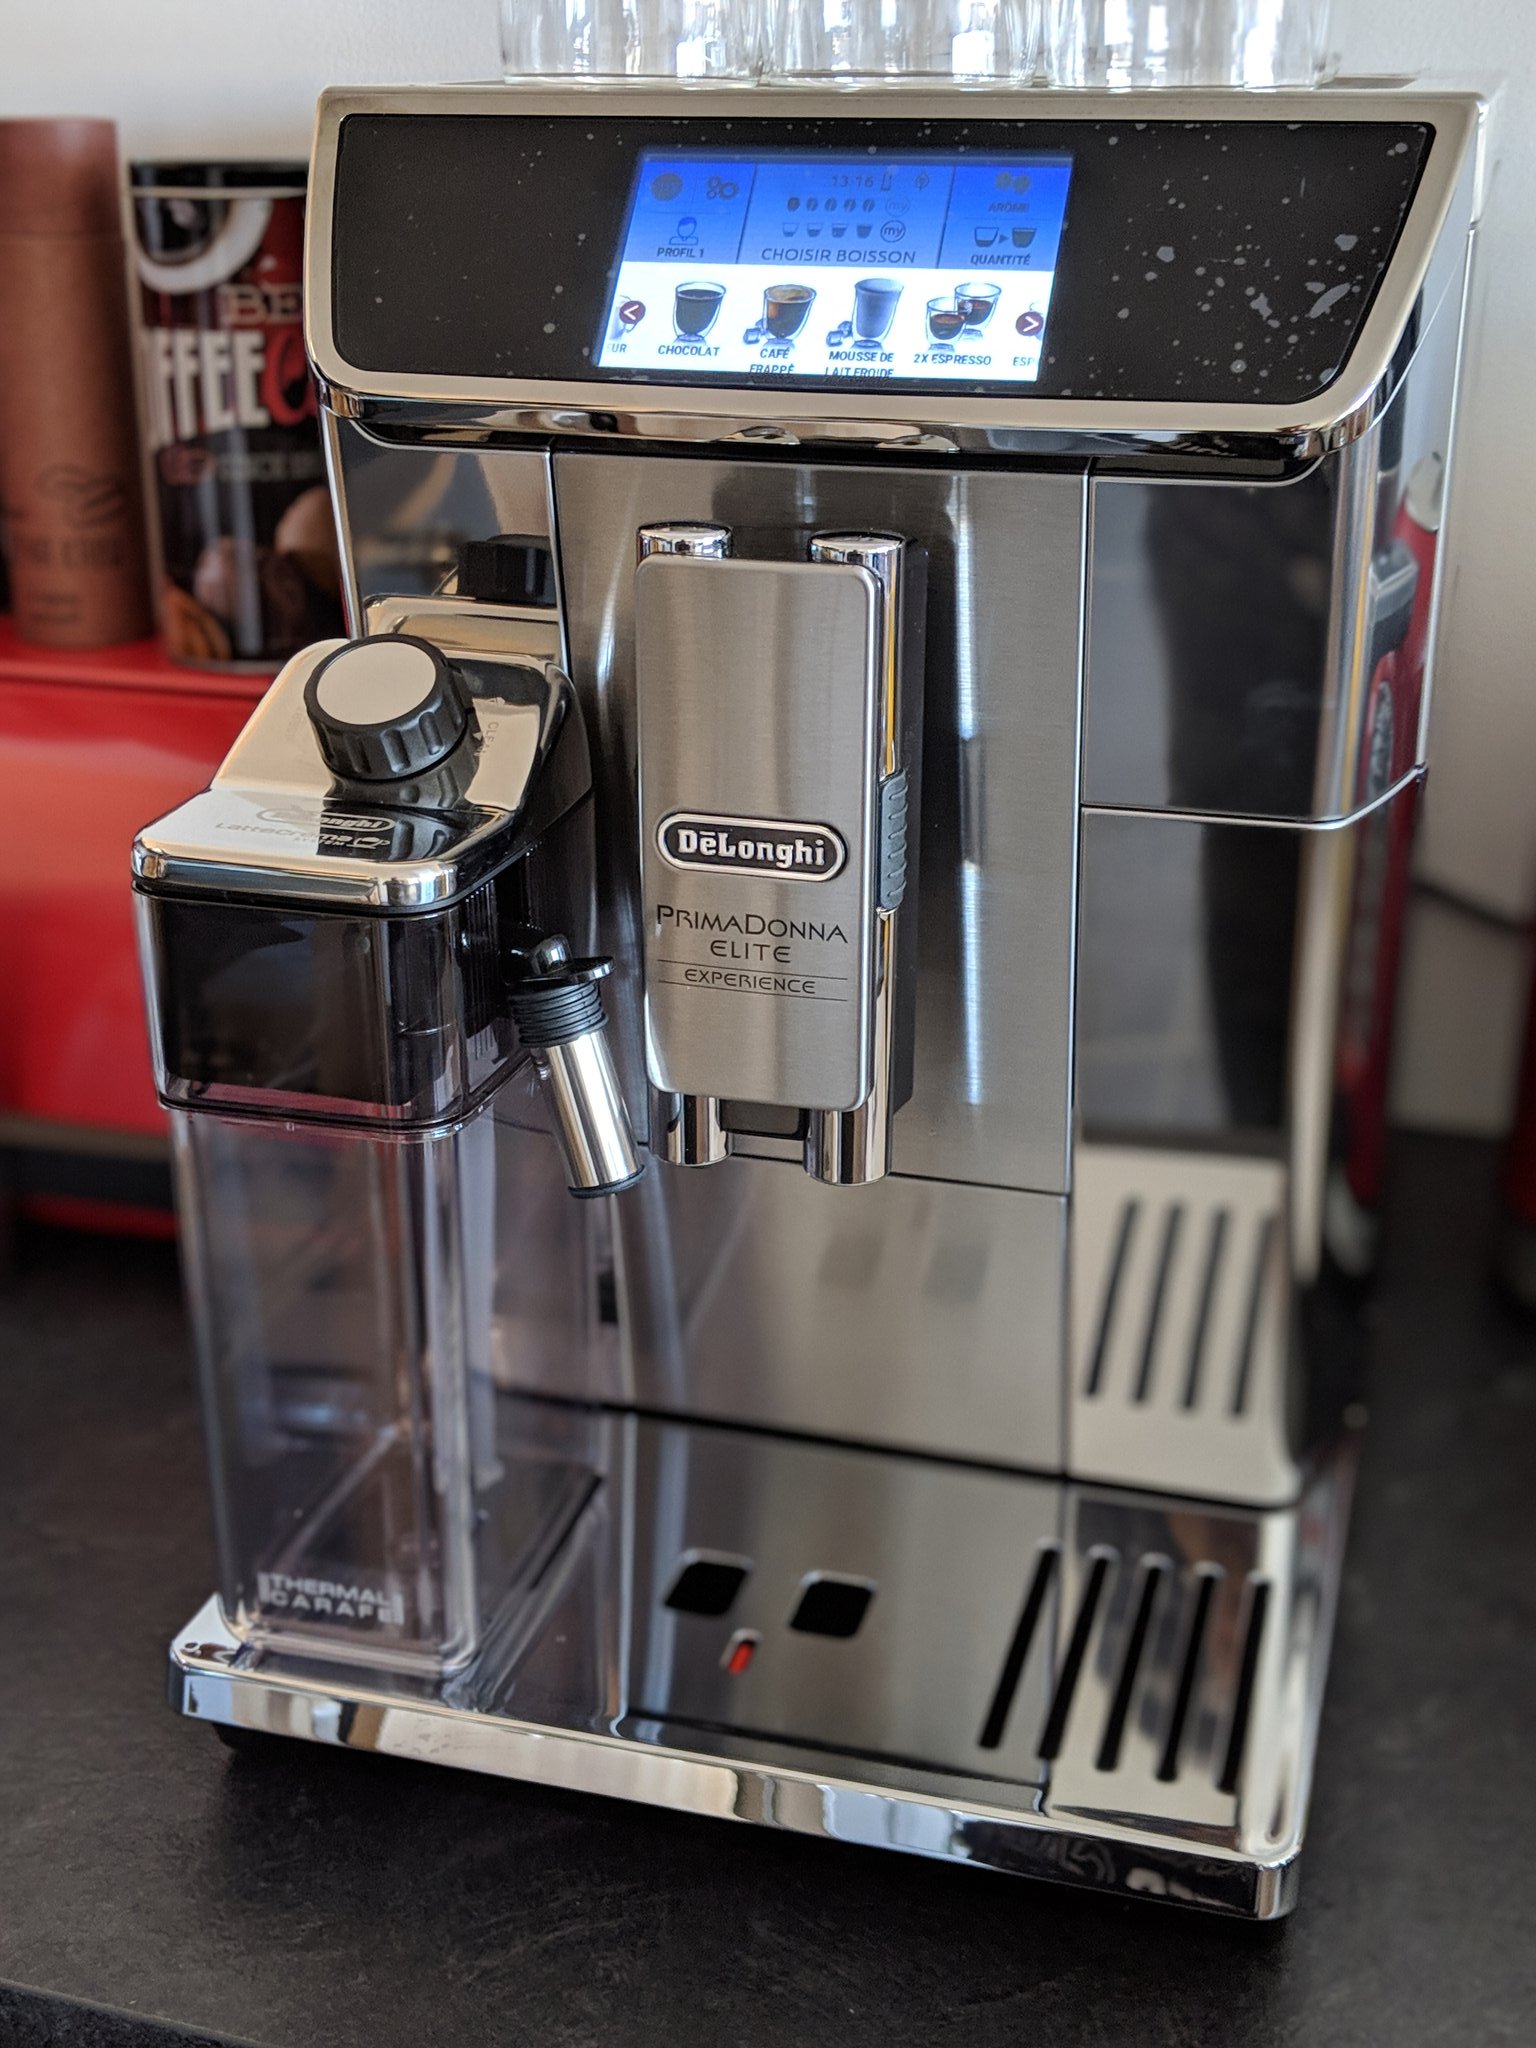 Wassim Chegham on Twitter: "@iamsteffipeters Thankfully we also invest in a @DeLonghiUK PrimaDonna Elite brewing machine, last year, and we love it. you know, the morning Starbucks ritual with